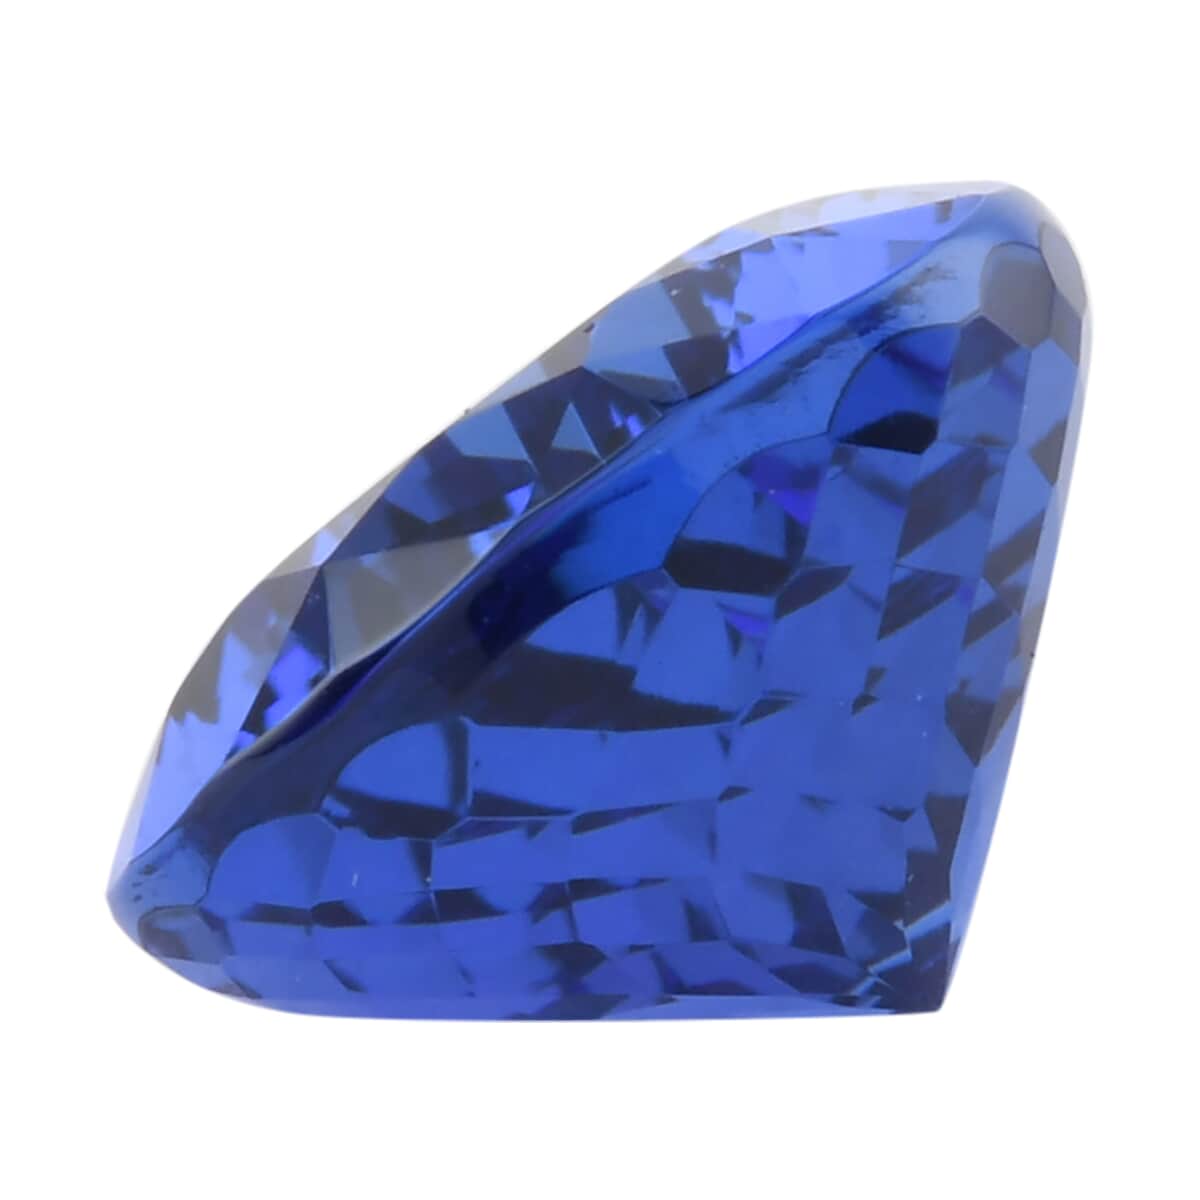 Certified and Appraised AAAA Vivid Tanzanite (Pear Free Size) 5.00 ctw, Loose Gemstone For Jewelry Making, Pear Free Size Tanzanite Gem, Tanzanite Stone For Jewelry image number 1